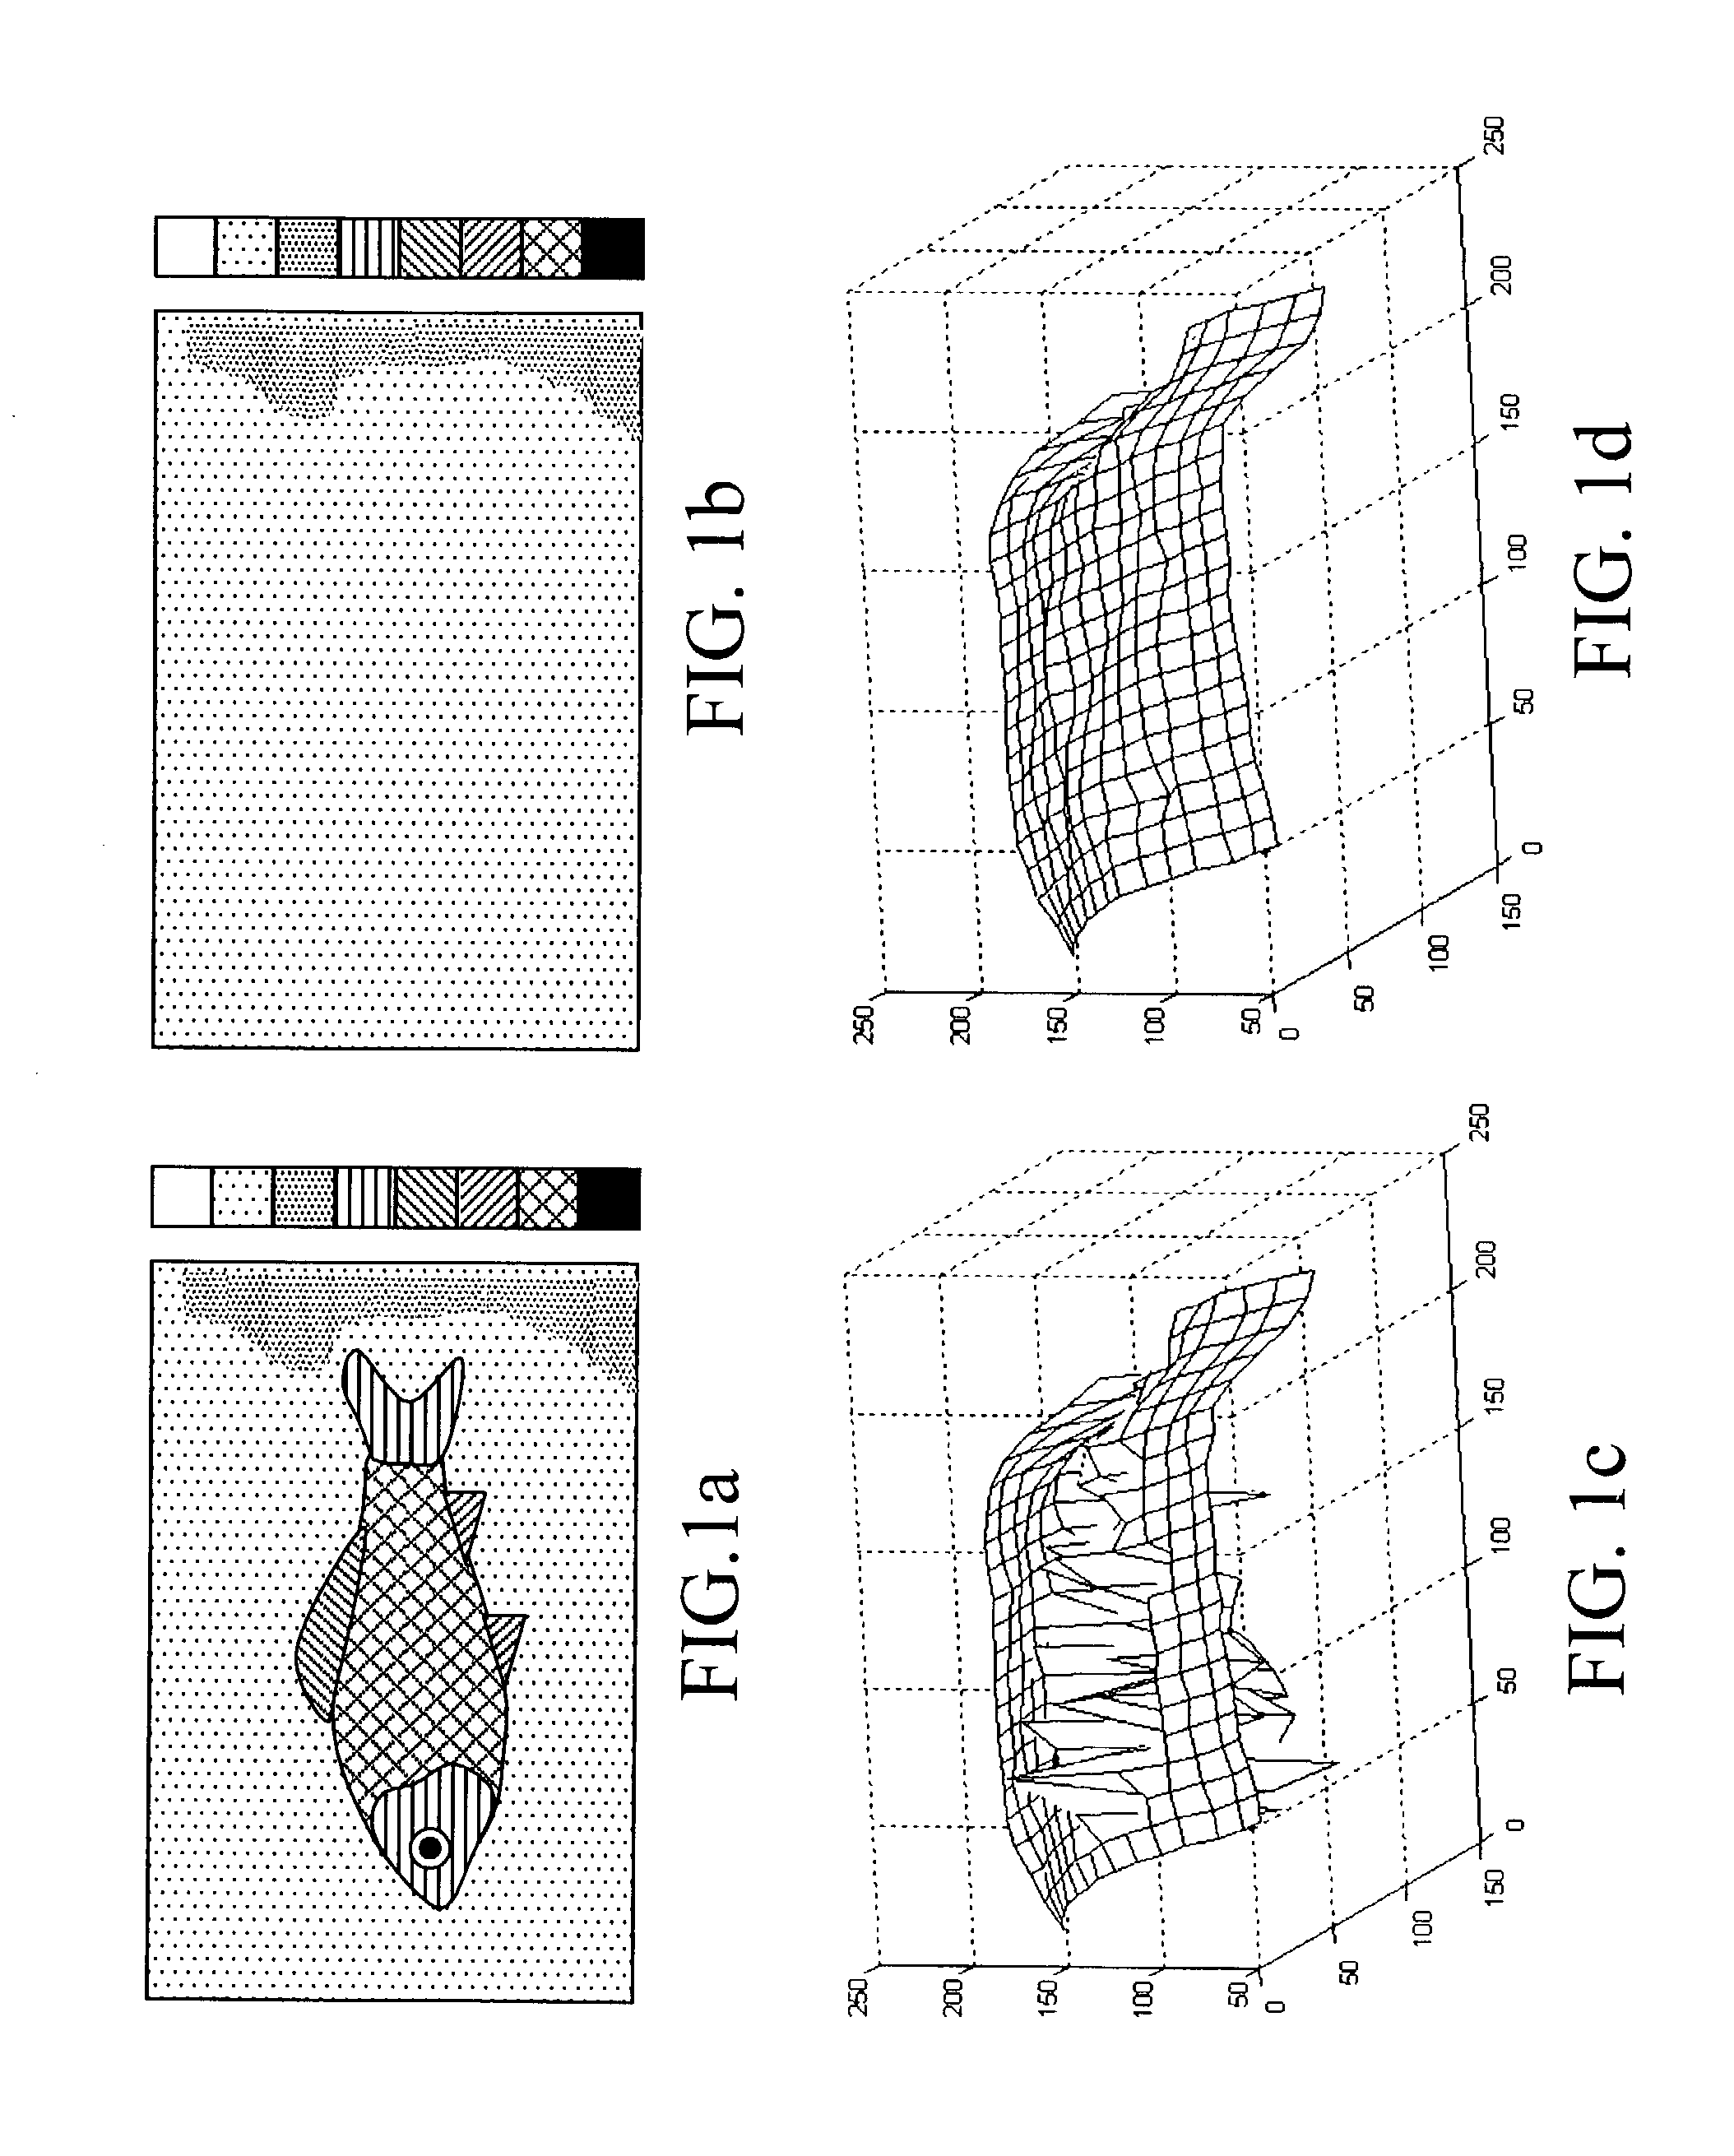 Apparatus and method for removing background on visual